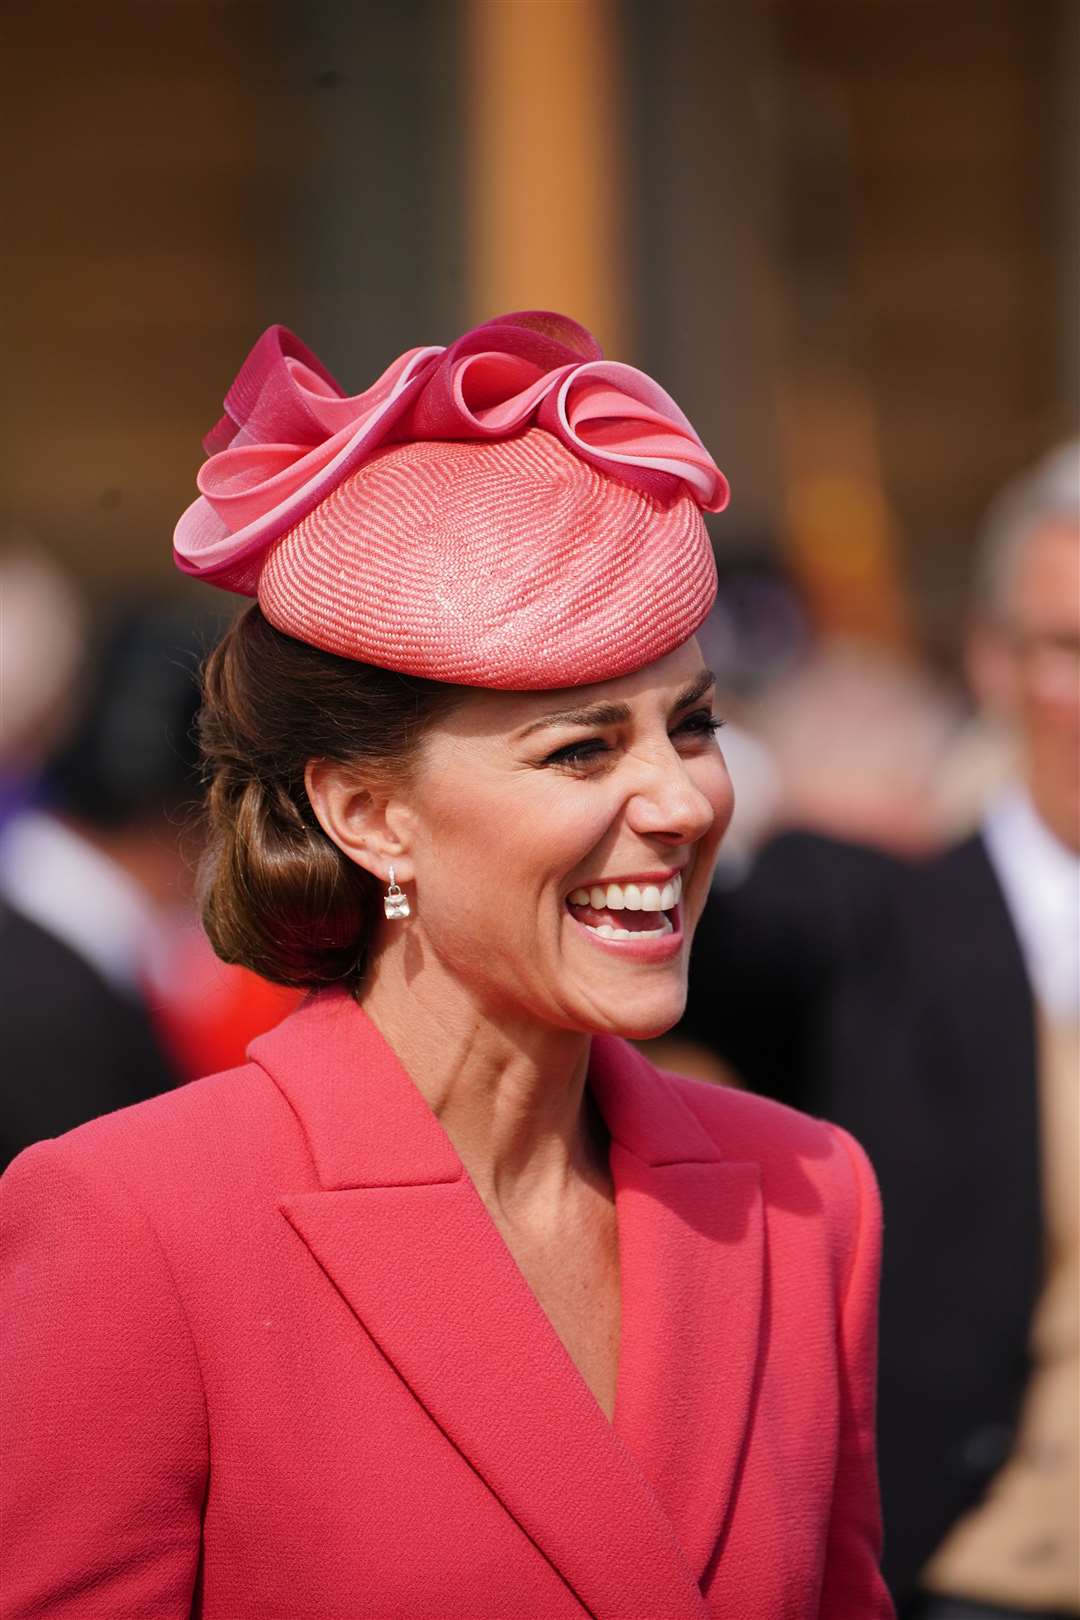 The Duchess of Cambridge seemed in good spirits as she laughed with guests at the Royal Garden Party (Dominic Lipinksi/ PA)